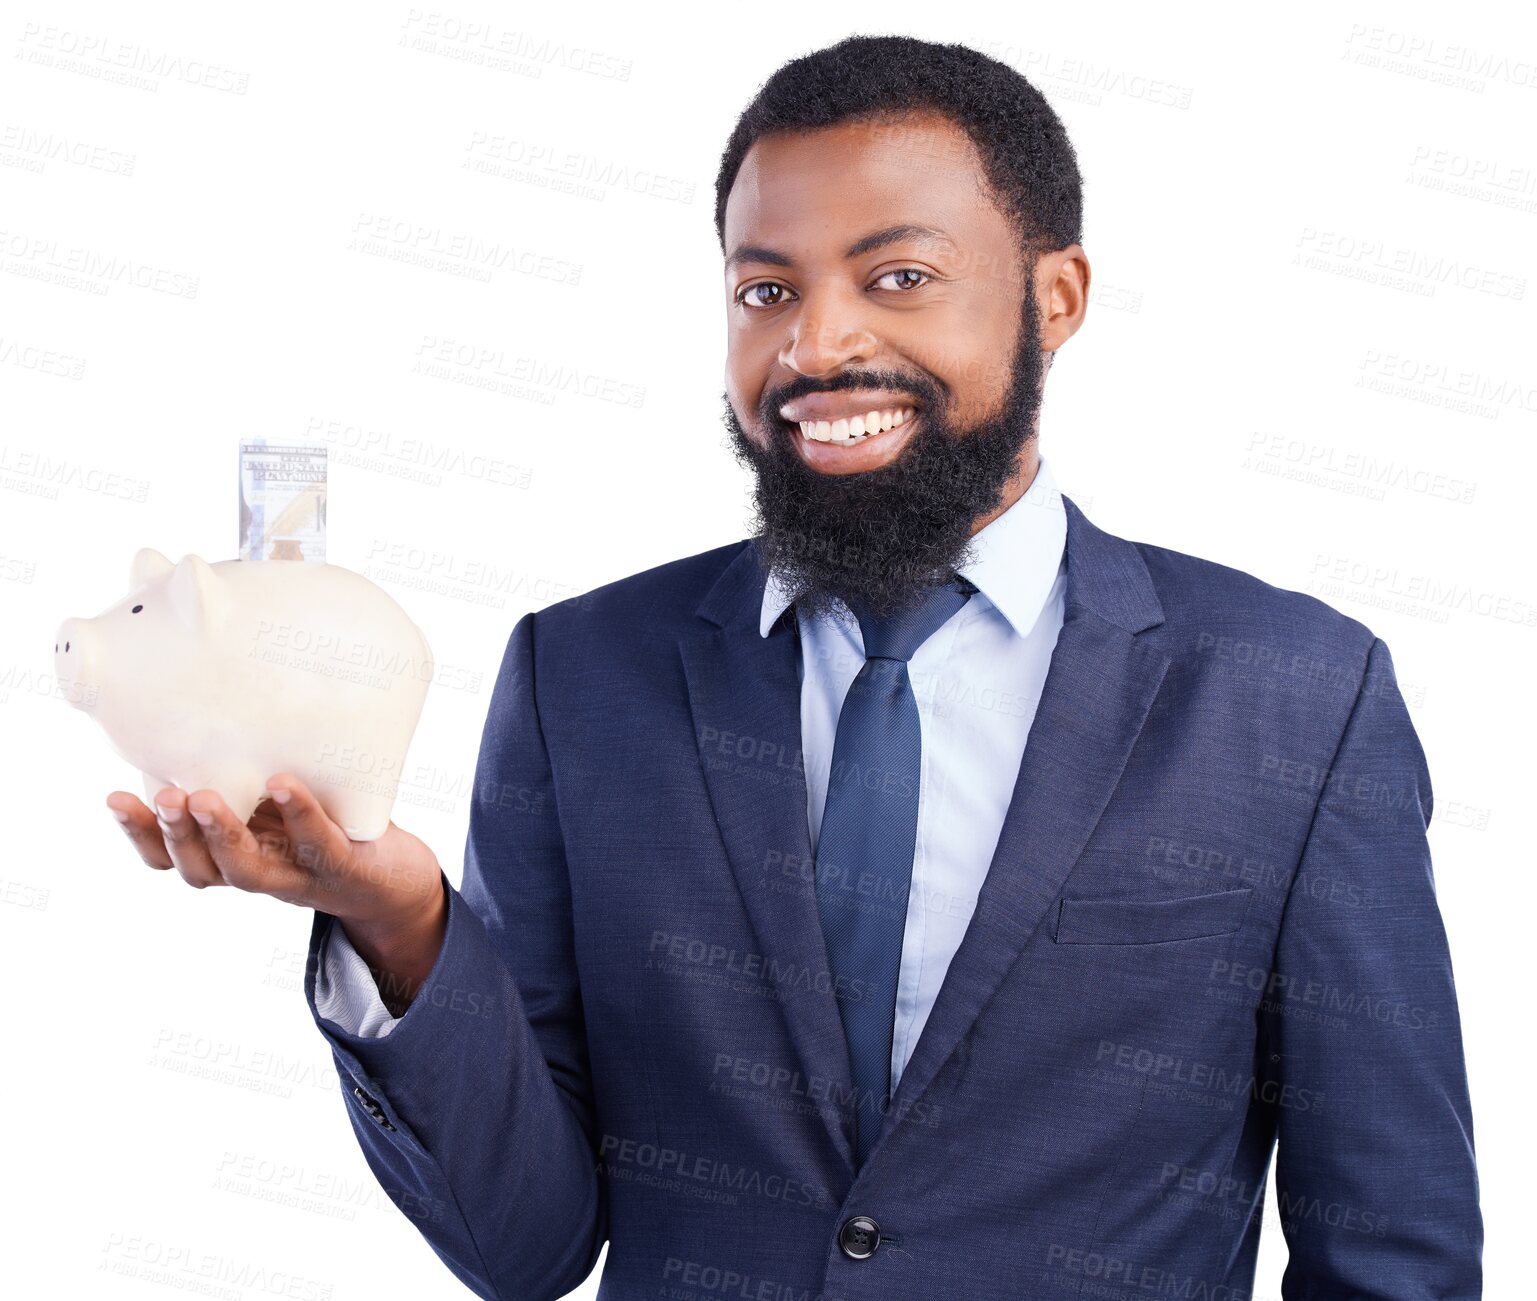 Buy stock photo Black man, piggy bank and portrait for business, dollar and investment for savings isolated on a transparent png background. Face, happy professional and money box, cash or finance, budget and profit